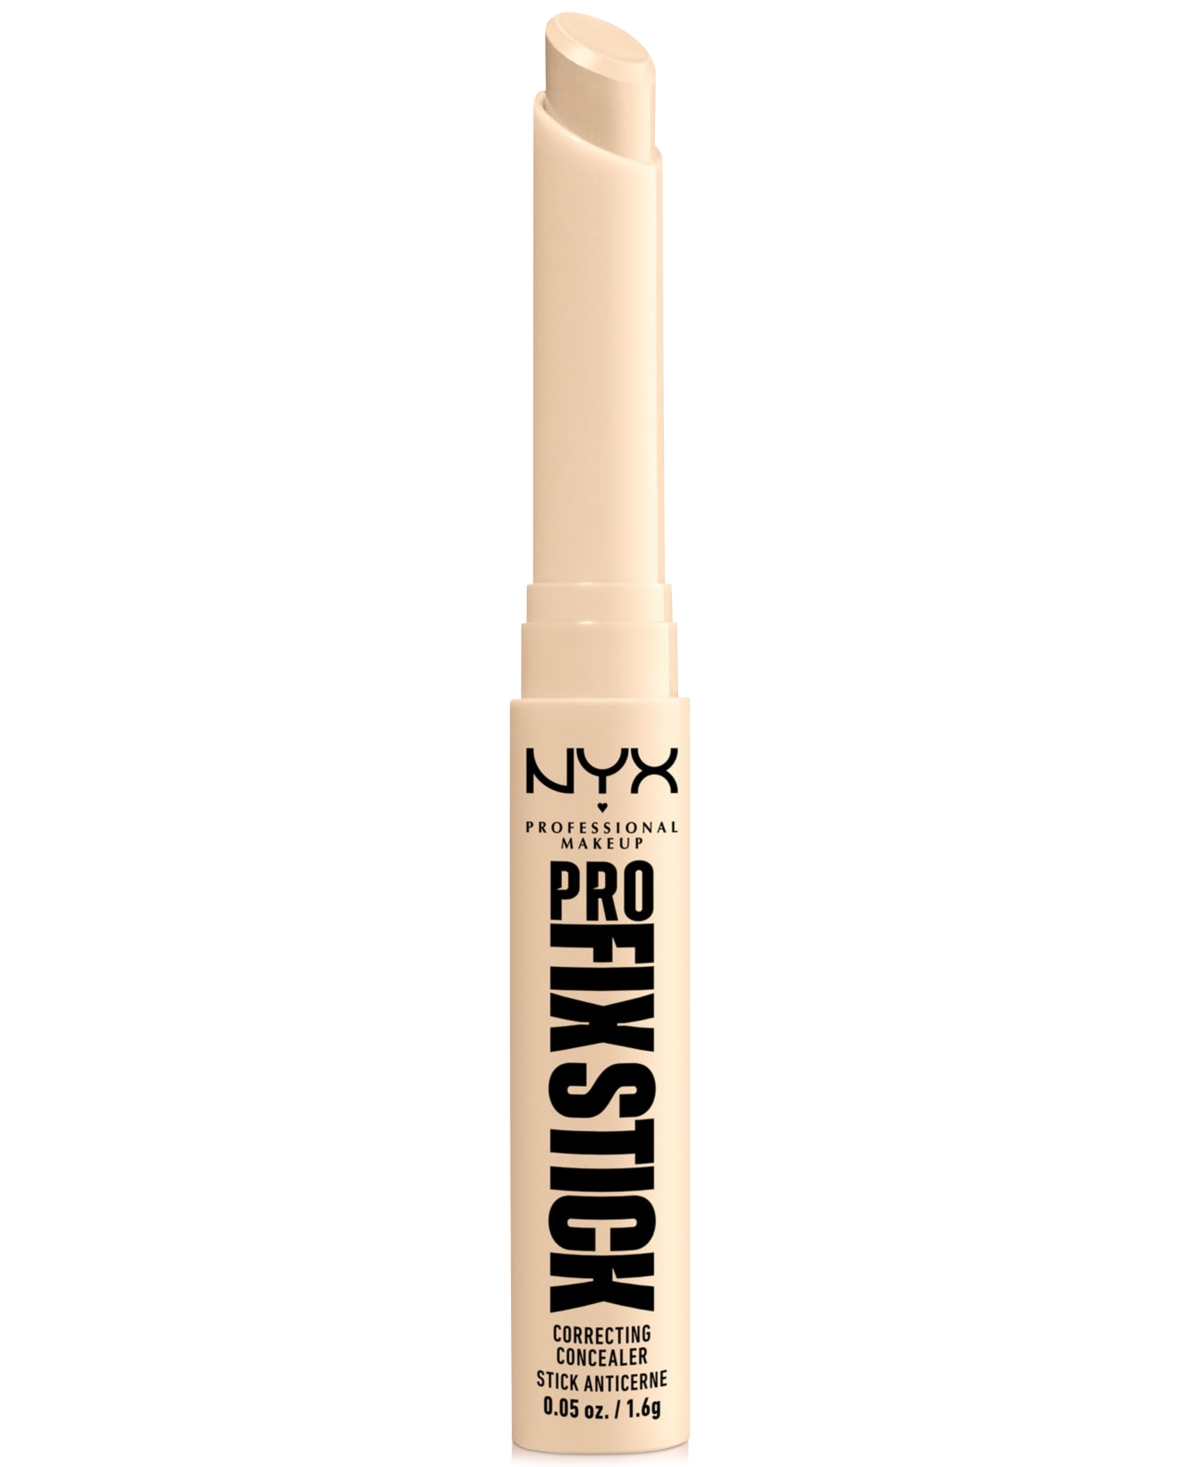 Nyx Professional Makeup Pro Fix Stick Correcting Concealer, 0.05 Oz. In Pale